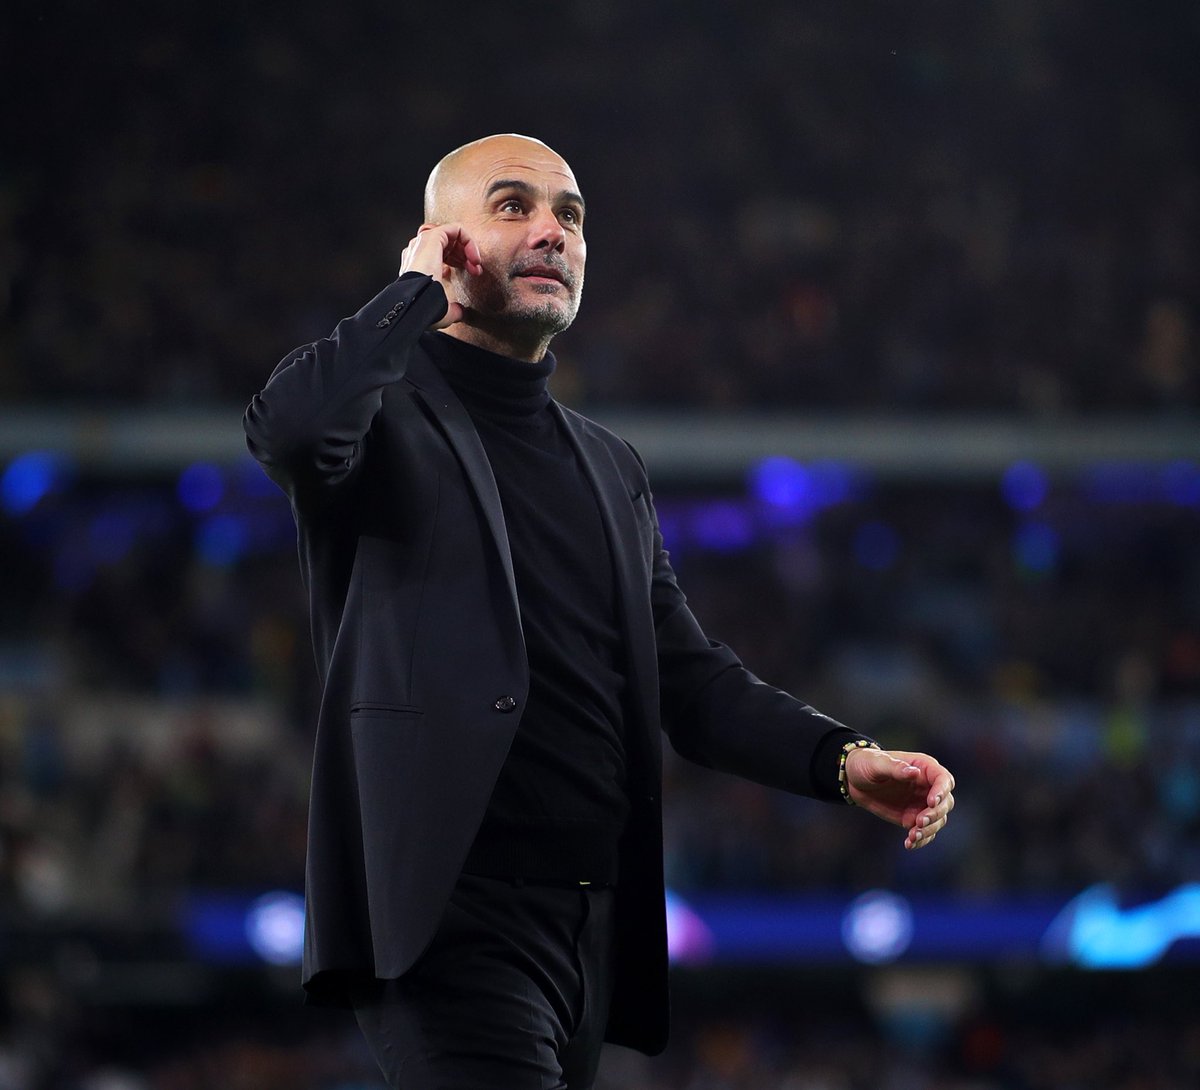 Don’t get me wrong, he is already the GOAT manager by a large distance. But Pep Guardiola’s GOAT legacy will become absolutely untouchable for the eternity if he wins the treble twice in a row.